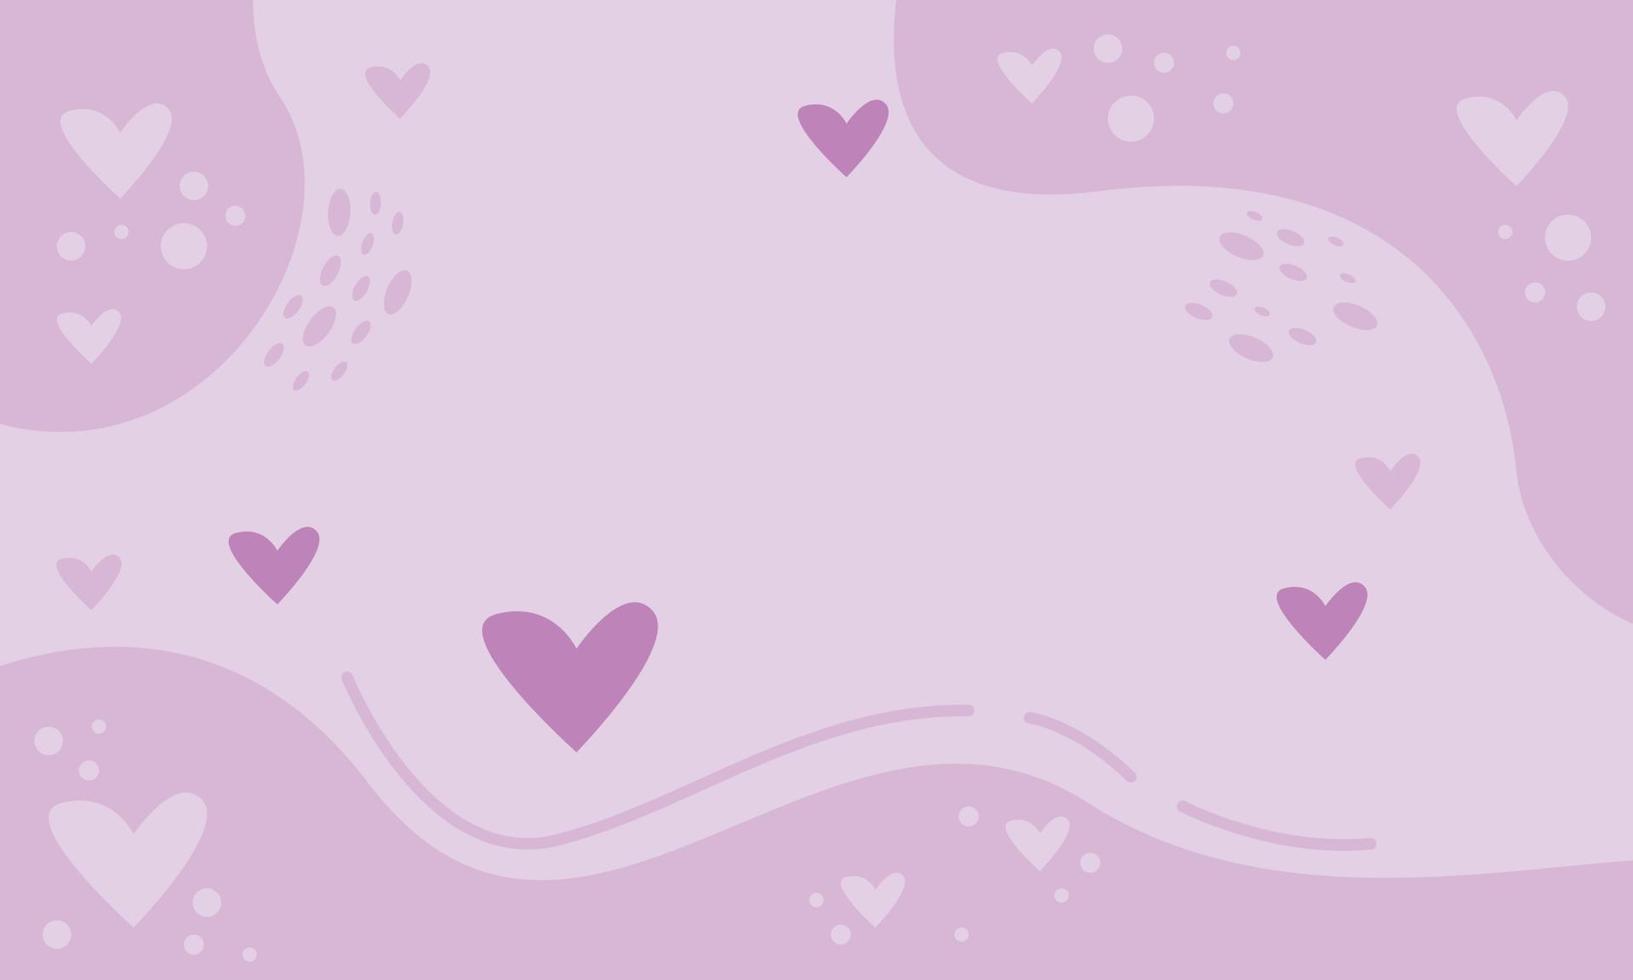 Abstract Love Background Wallpaper with Hand Drawn Style vector